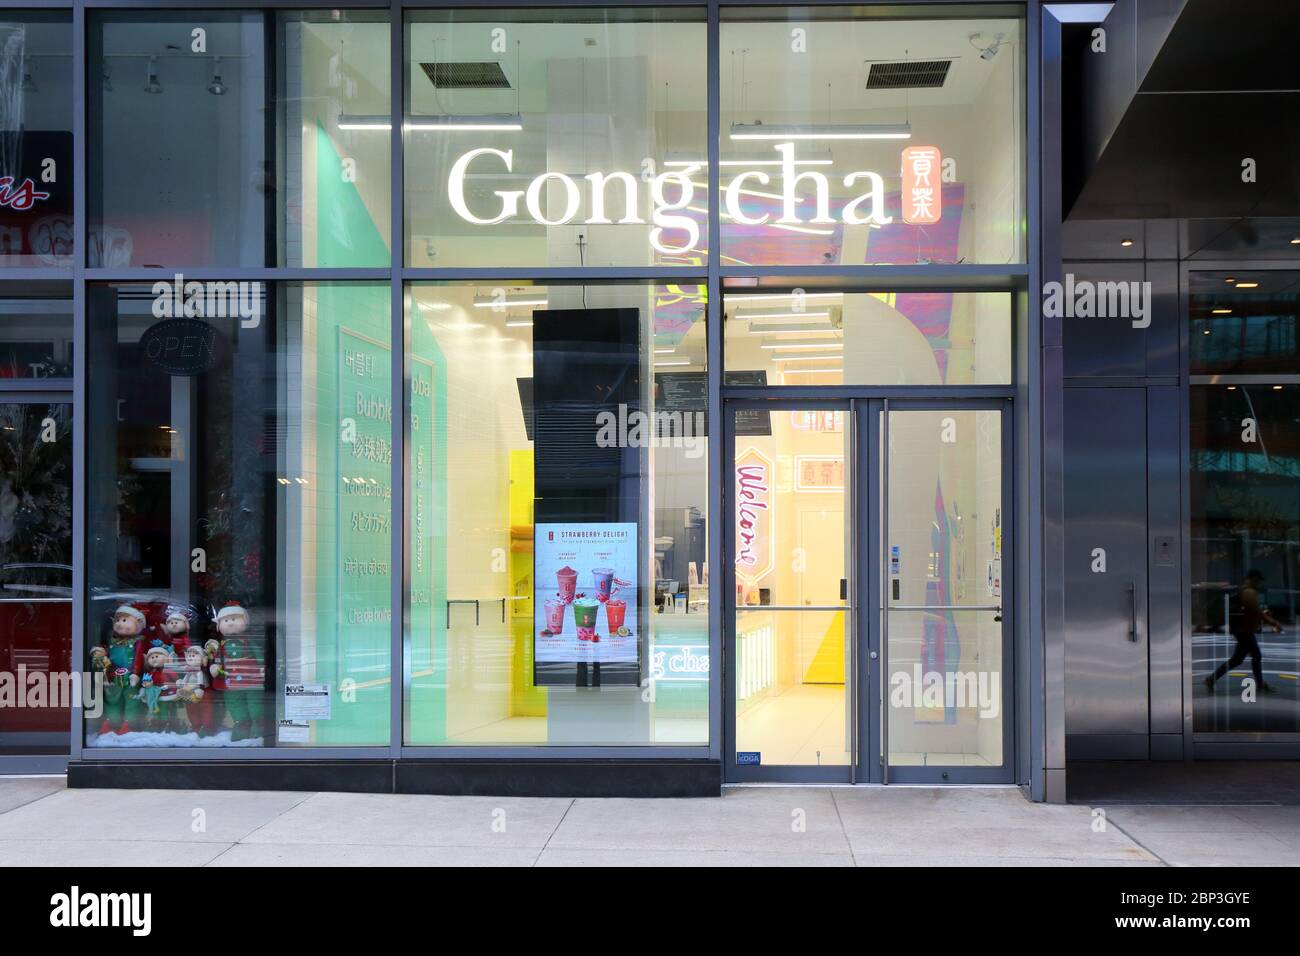 Gong Cha, 1600 Broadway, New York, NY. exterior storefront of a bubble tea shop in Times Square in Manhattan. Stock Photo